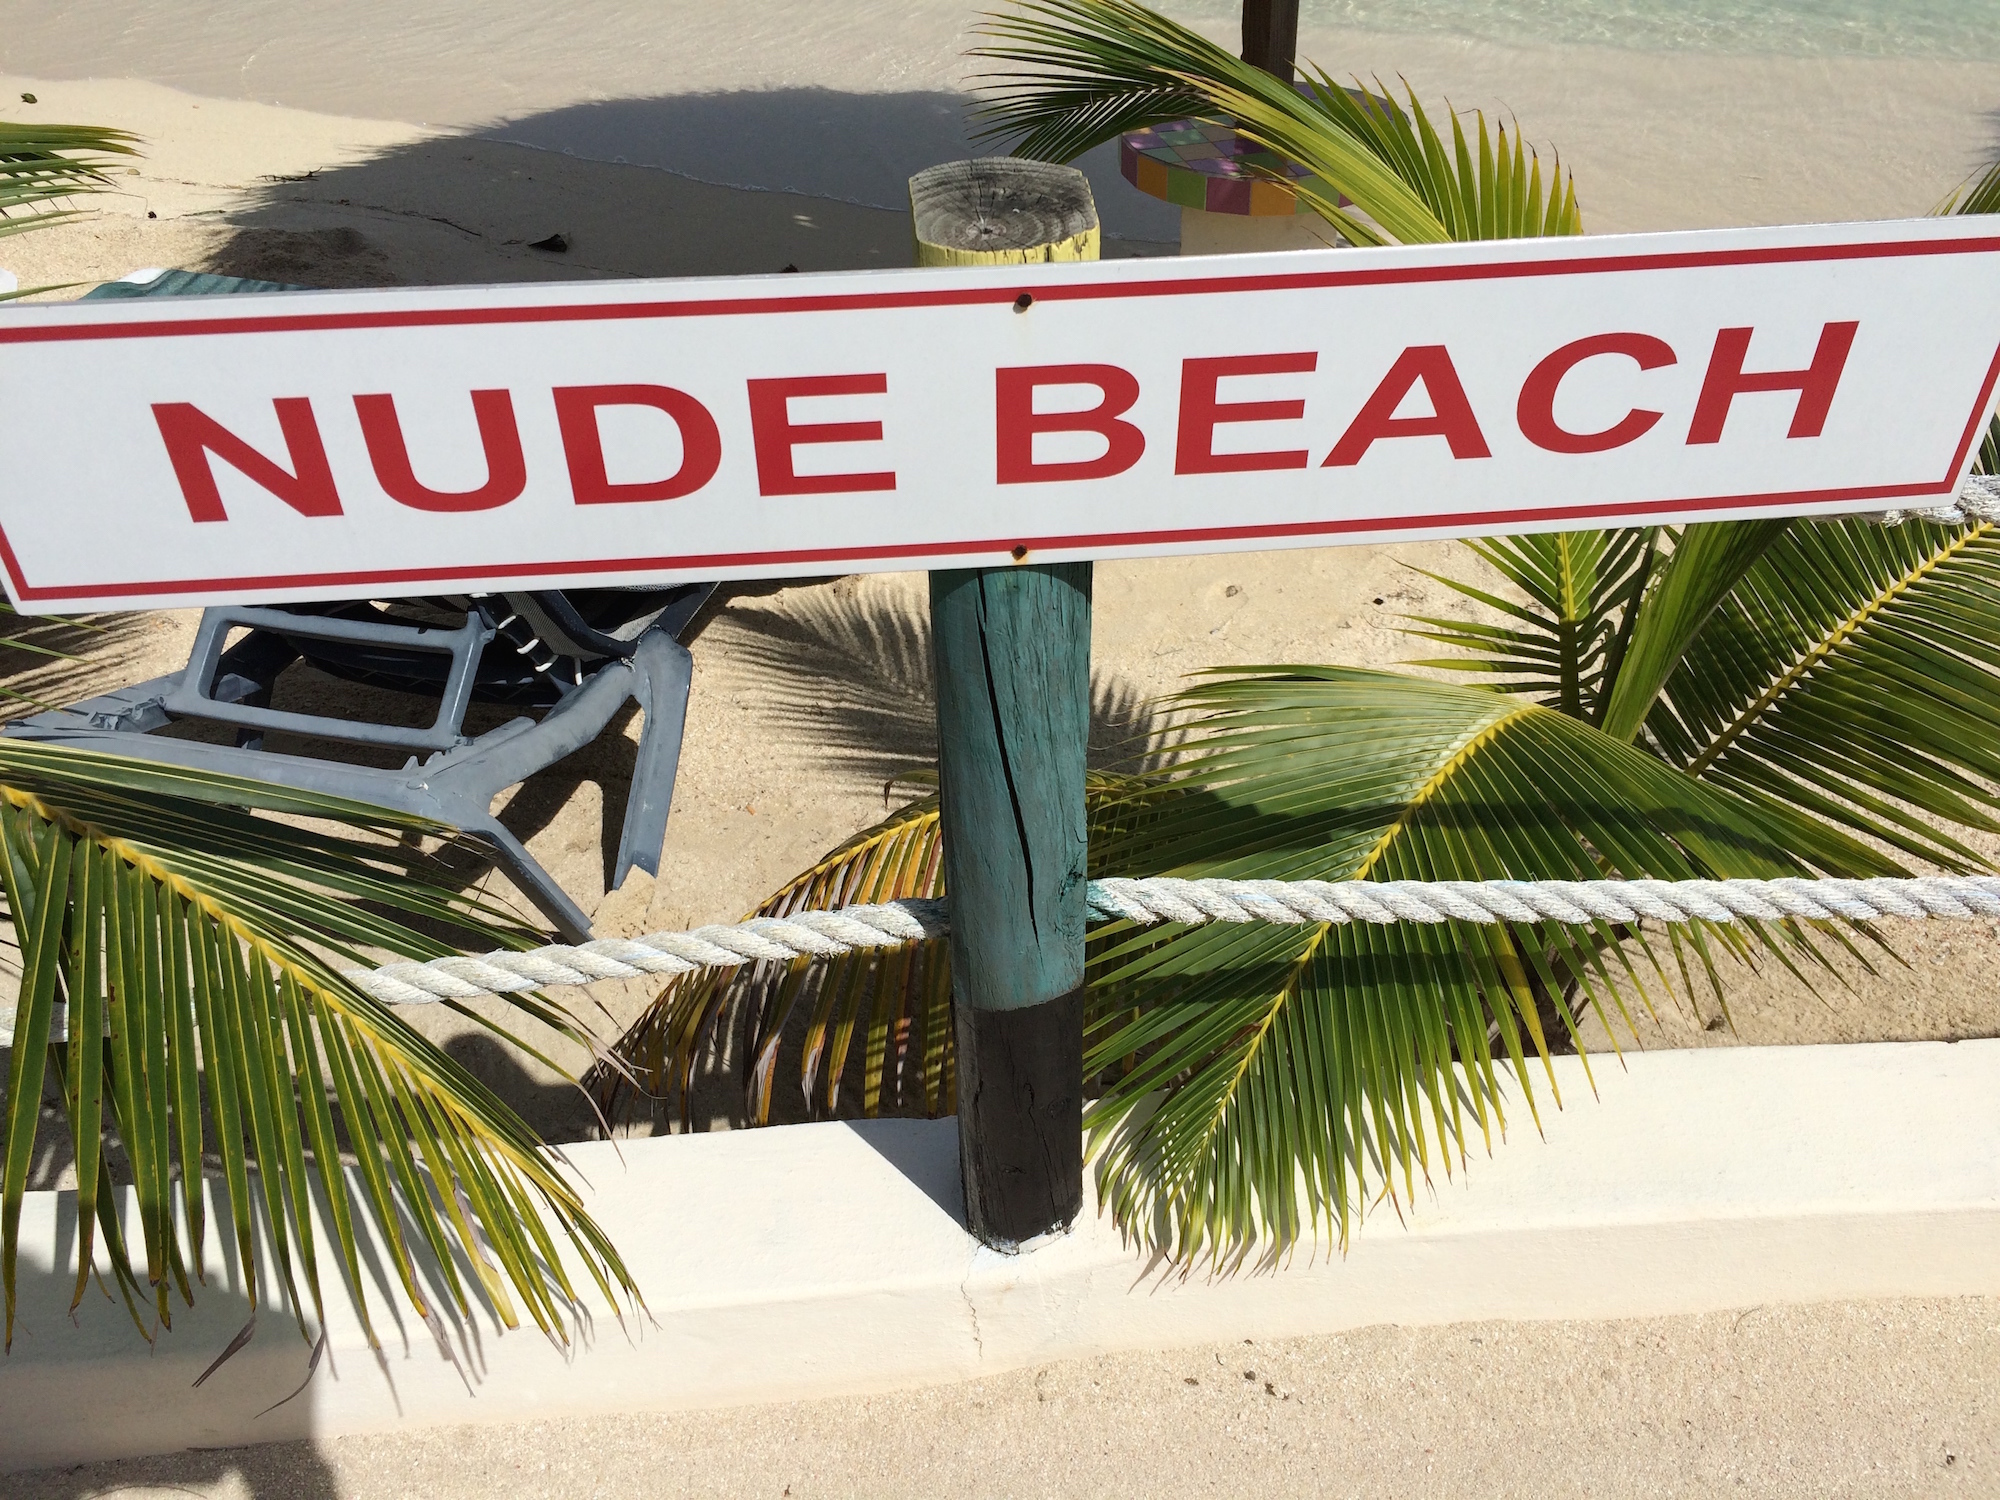 brad schrimsher recommends nude beaches in jamaica pic